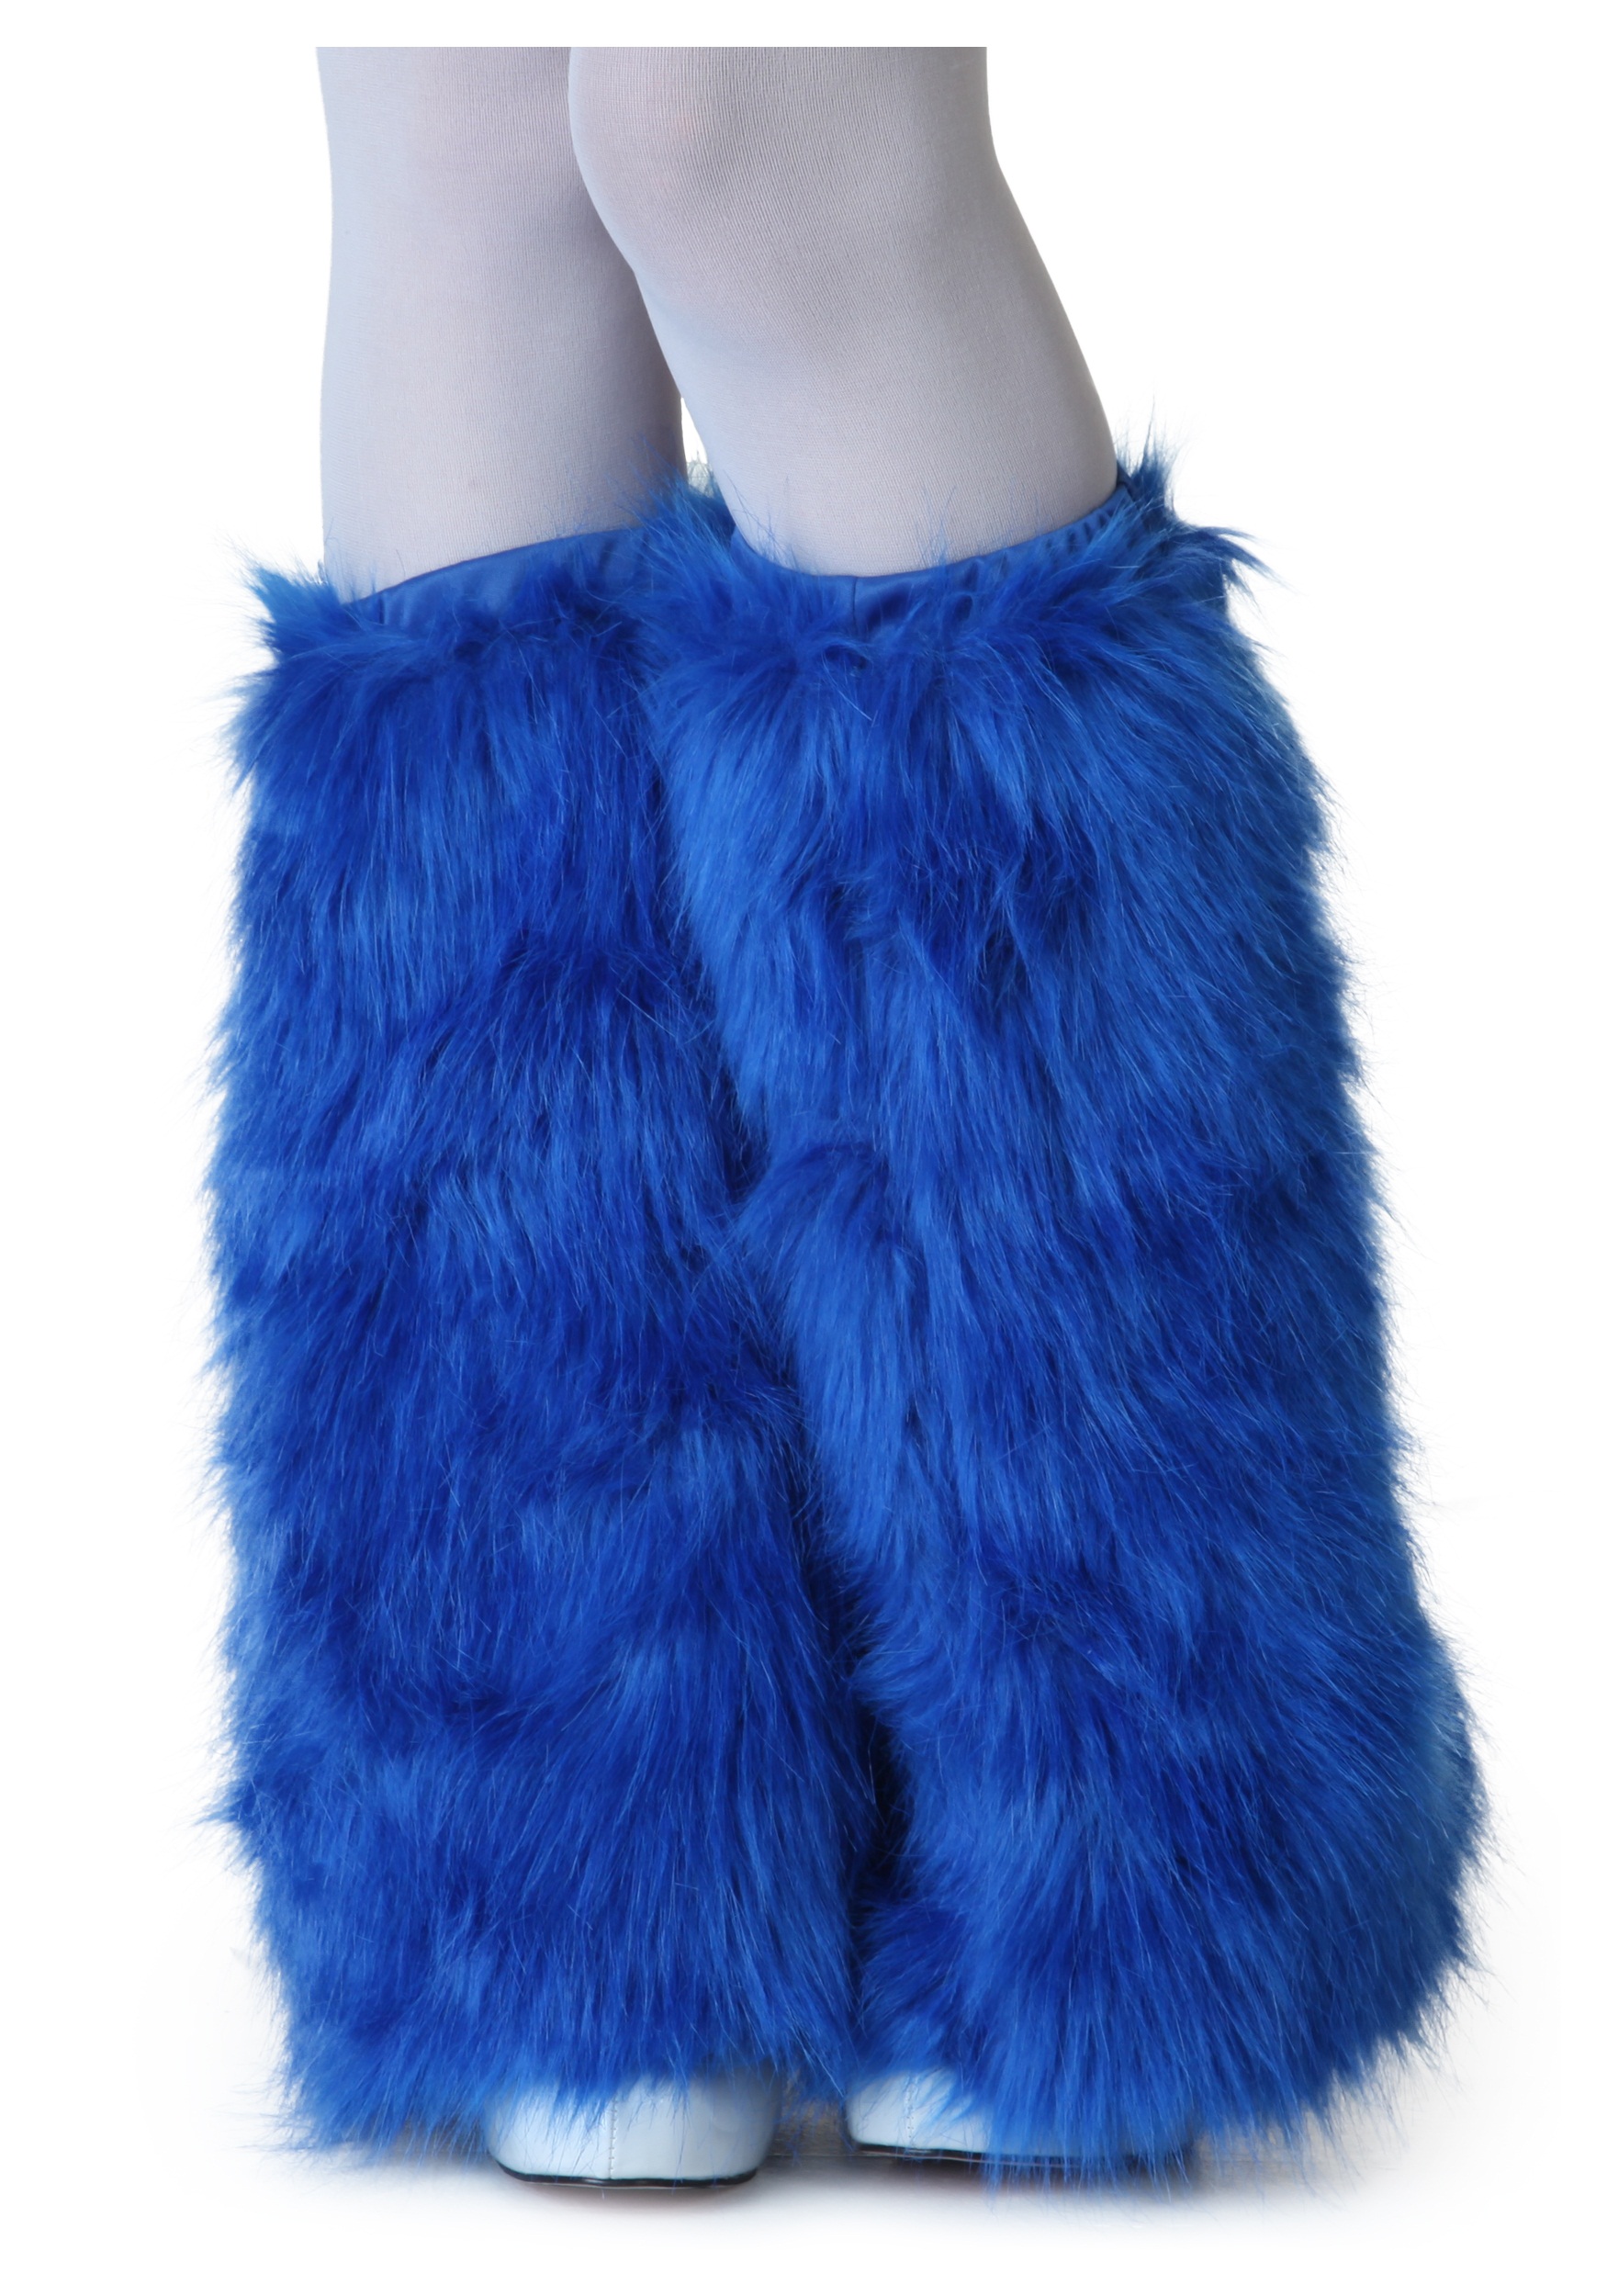 Adult Royal Blue Furry Boot Covers , Fancy Dress Costume Accessories